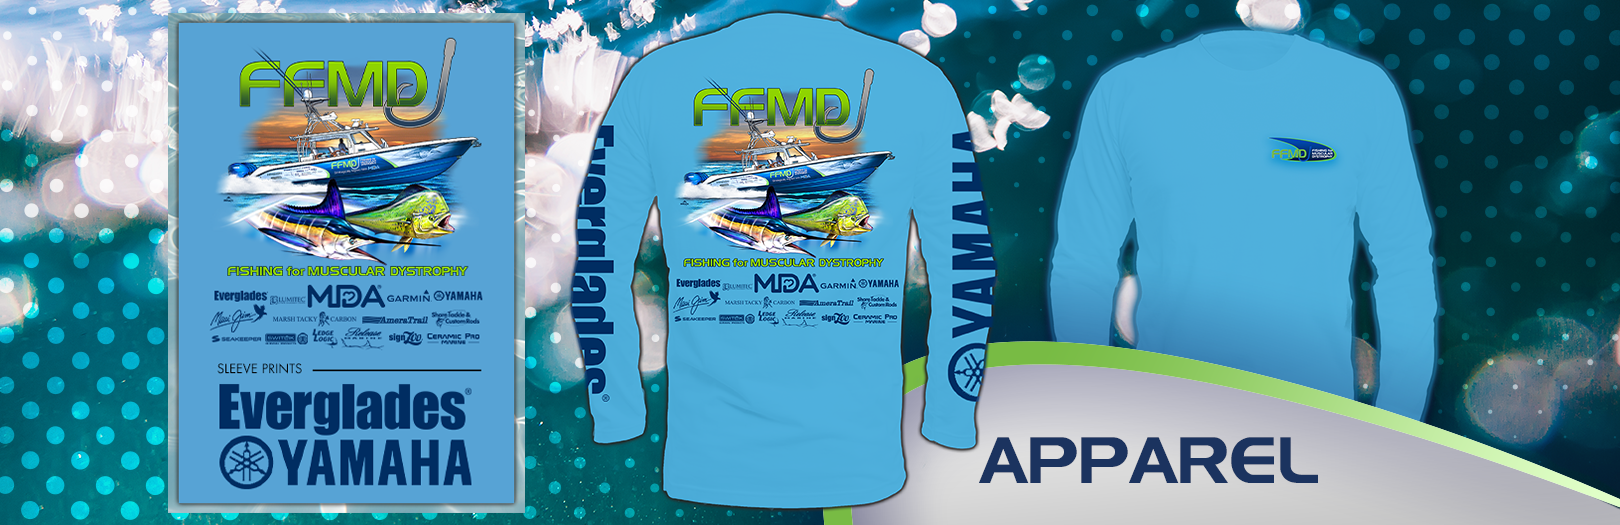 Long Sleeve FFMD Boat Marlin Dolphin Performance Shirt (Dri-Fit